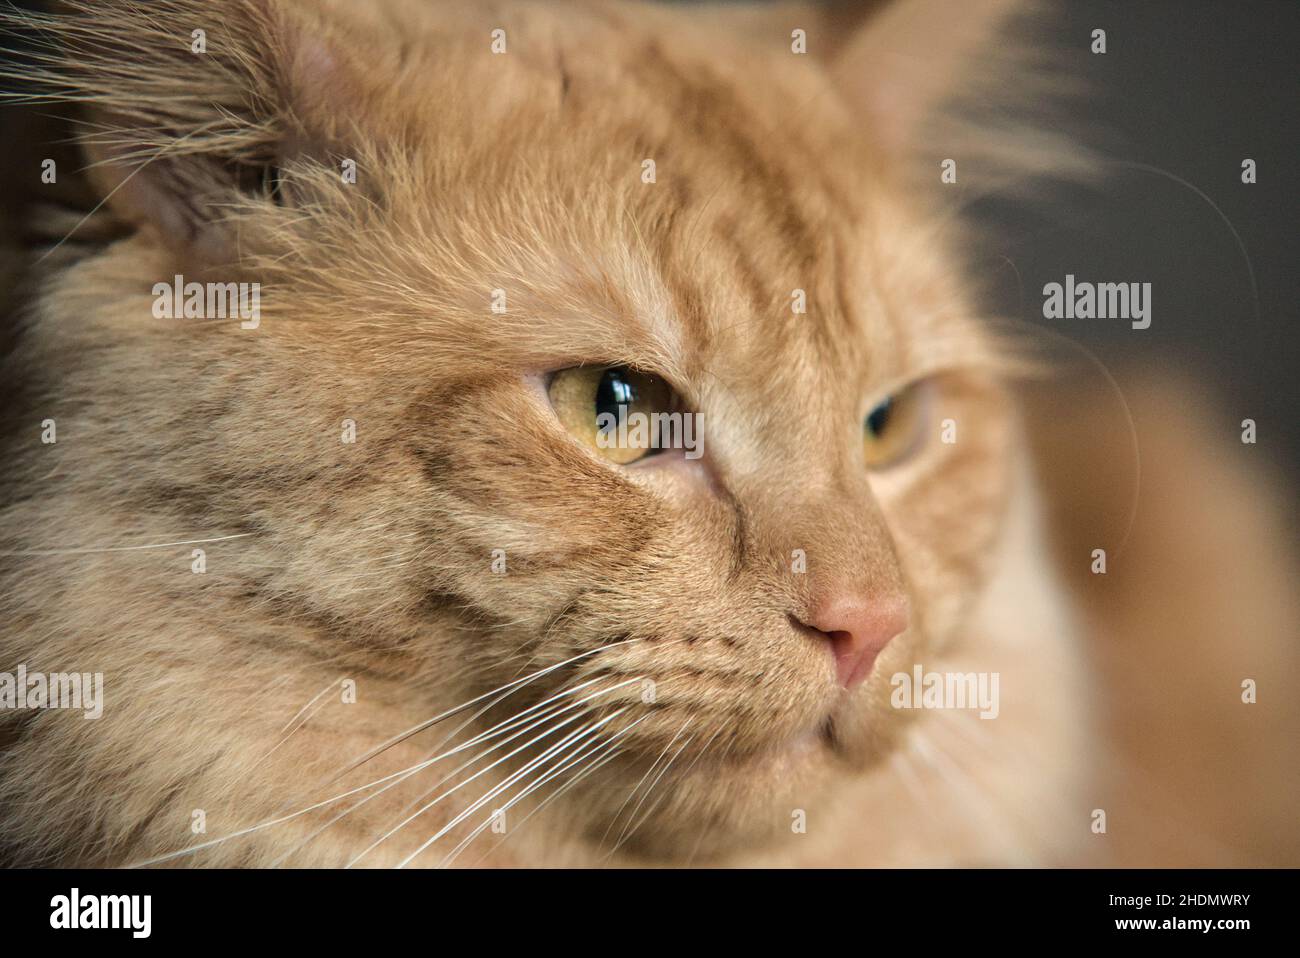 Ginger cat with yellow eyes Stock Photo